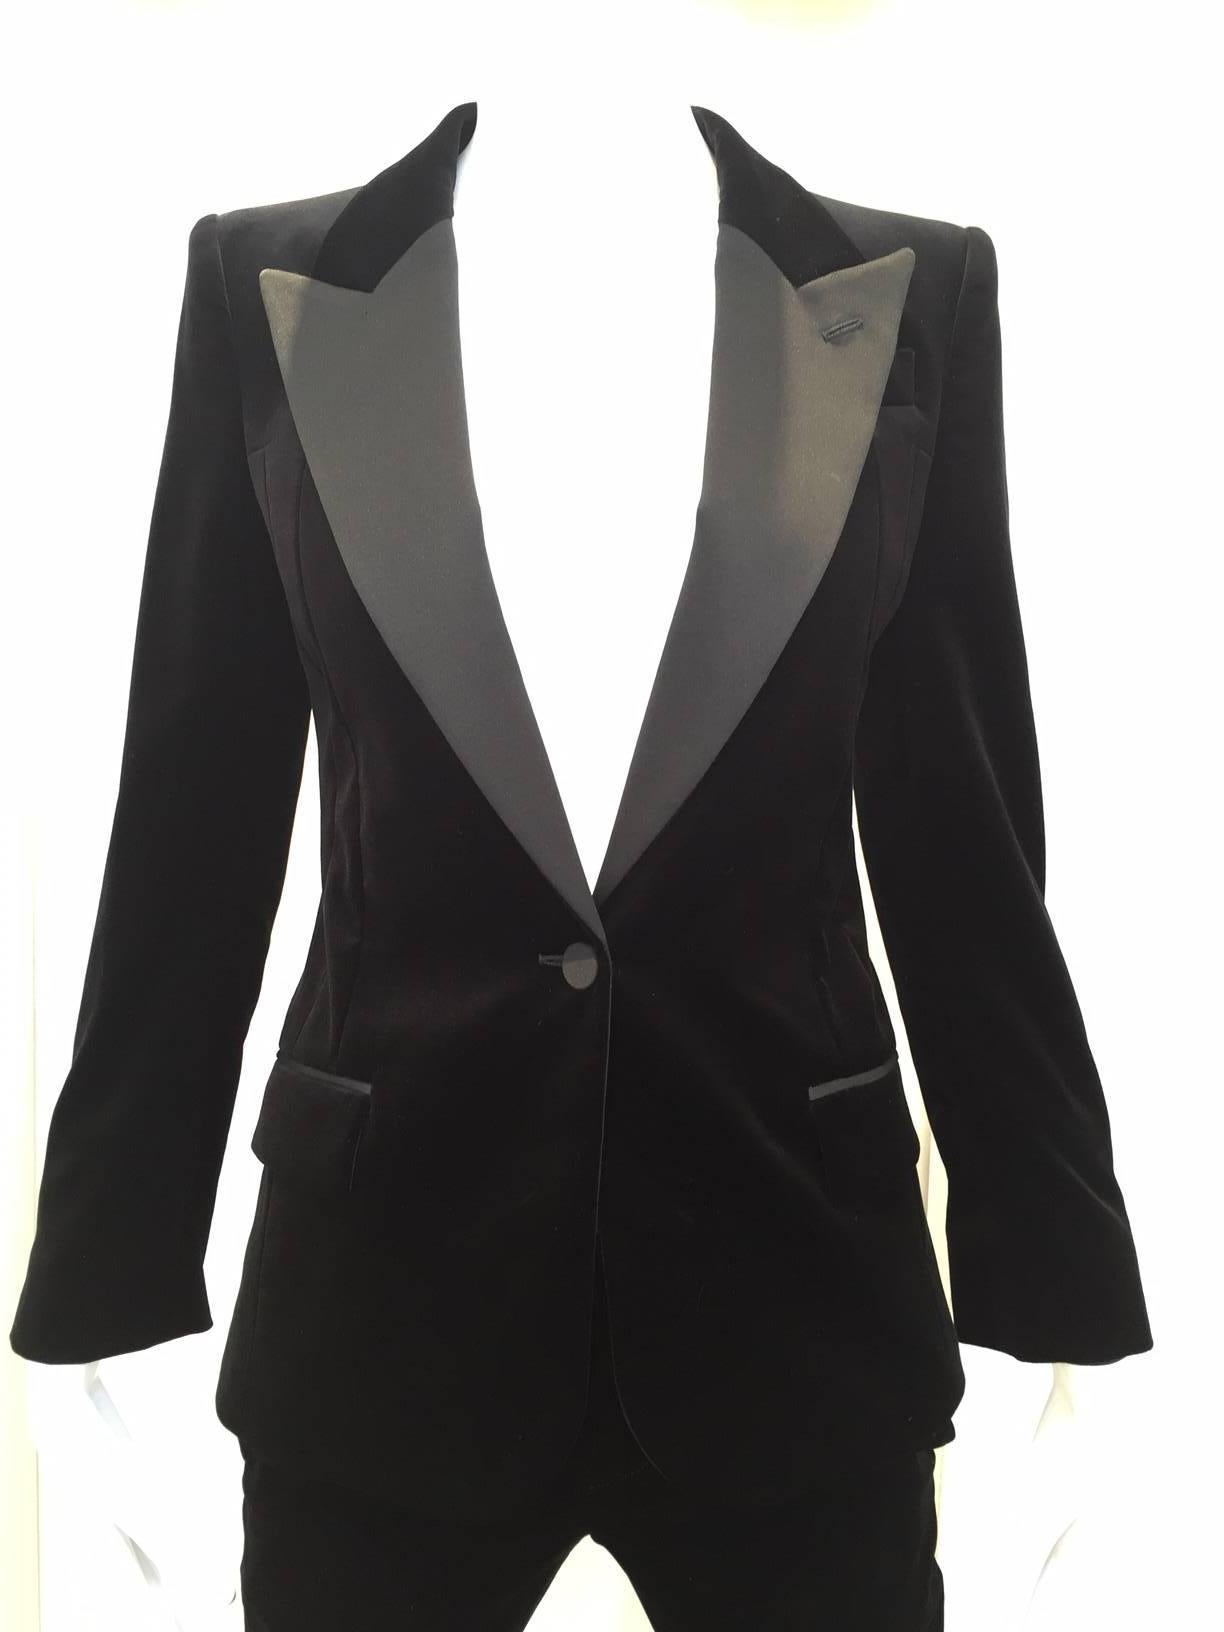 Gucci black velvet pant suit with satin lapel.
Size: 38/ 2. best for petite
Bust: 32inches /  W: 25inches/ Hip: 34inches